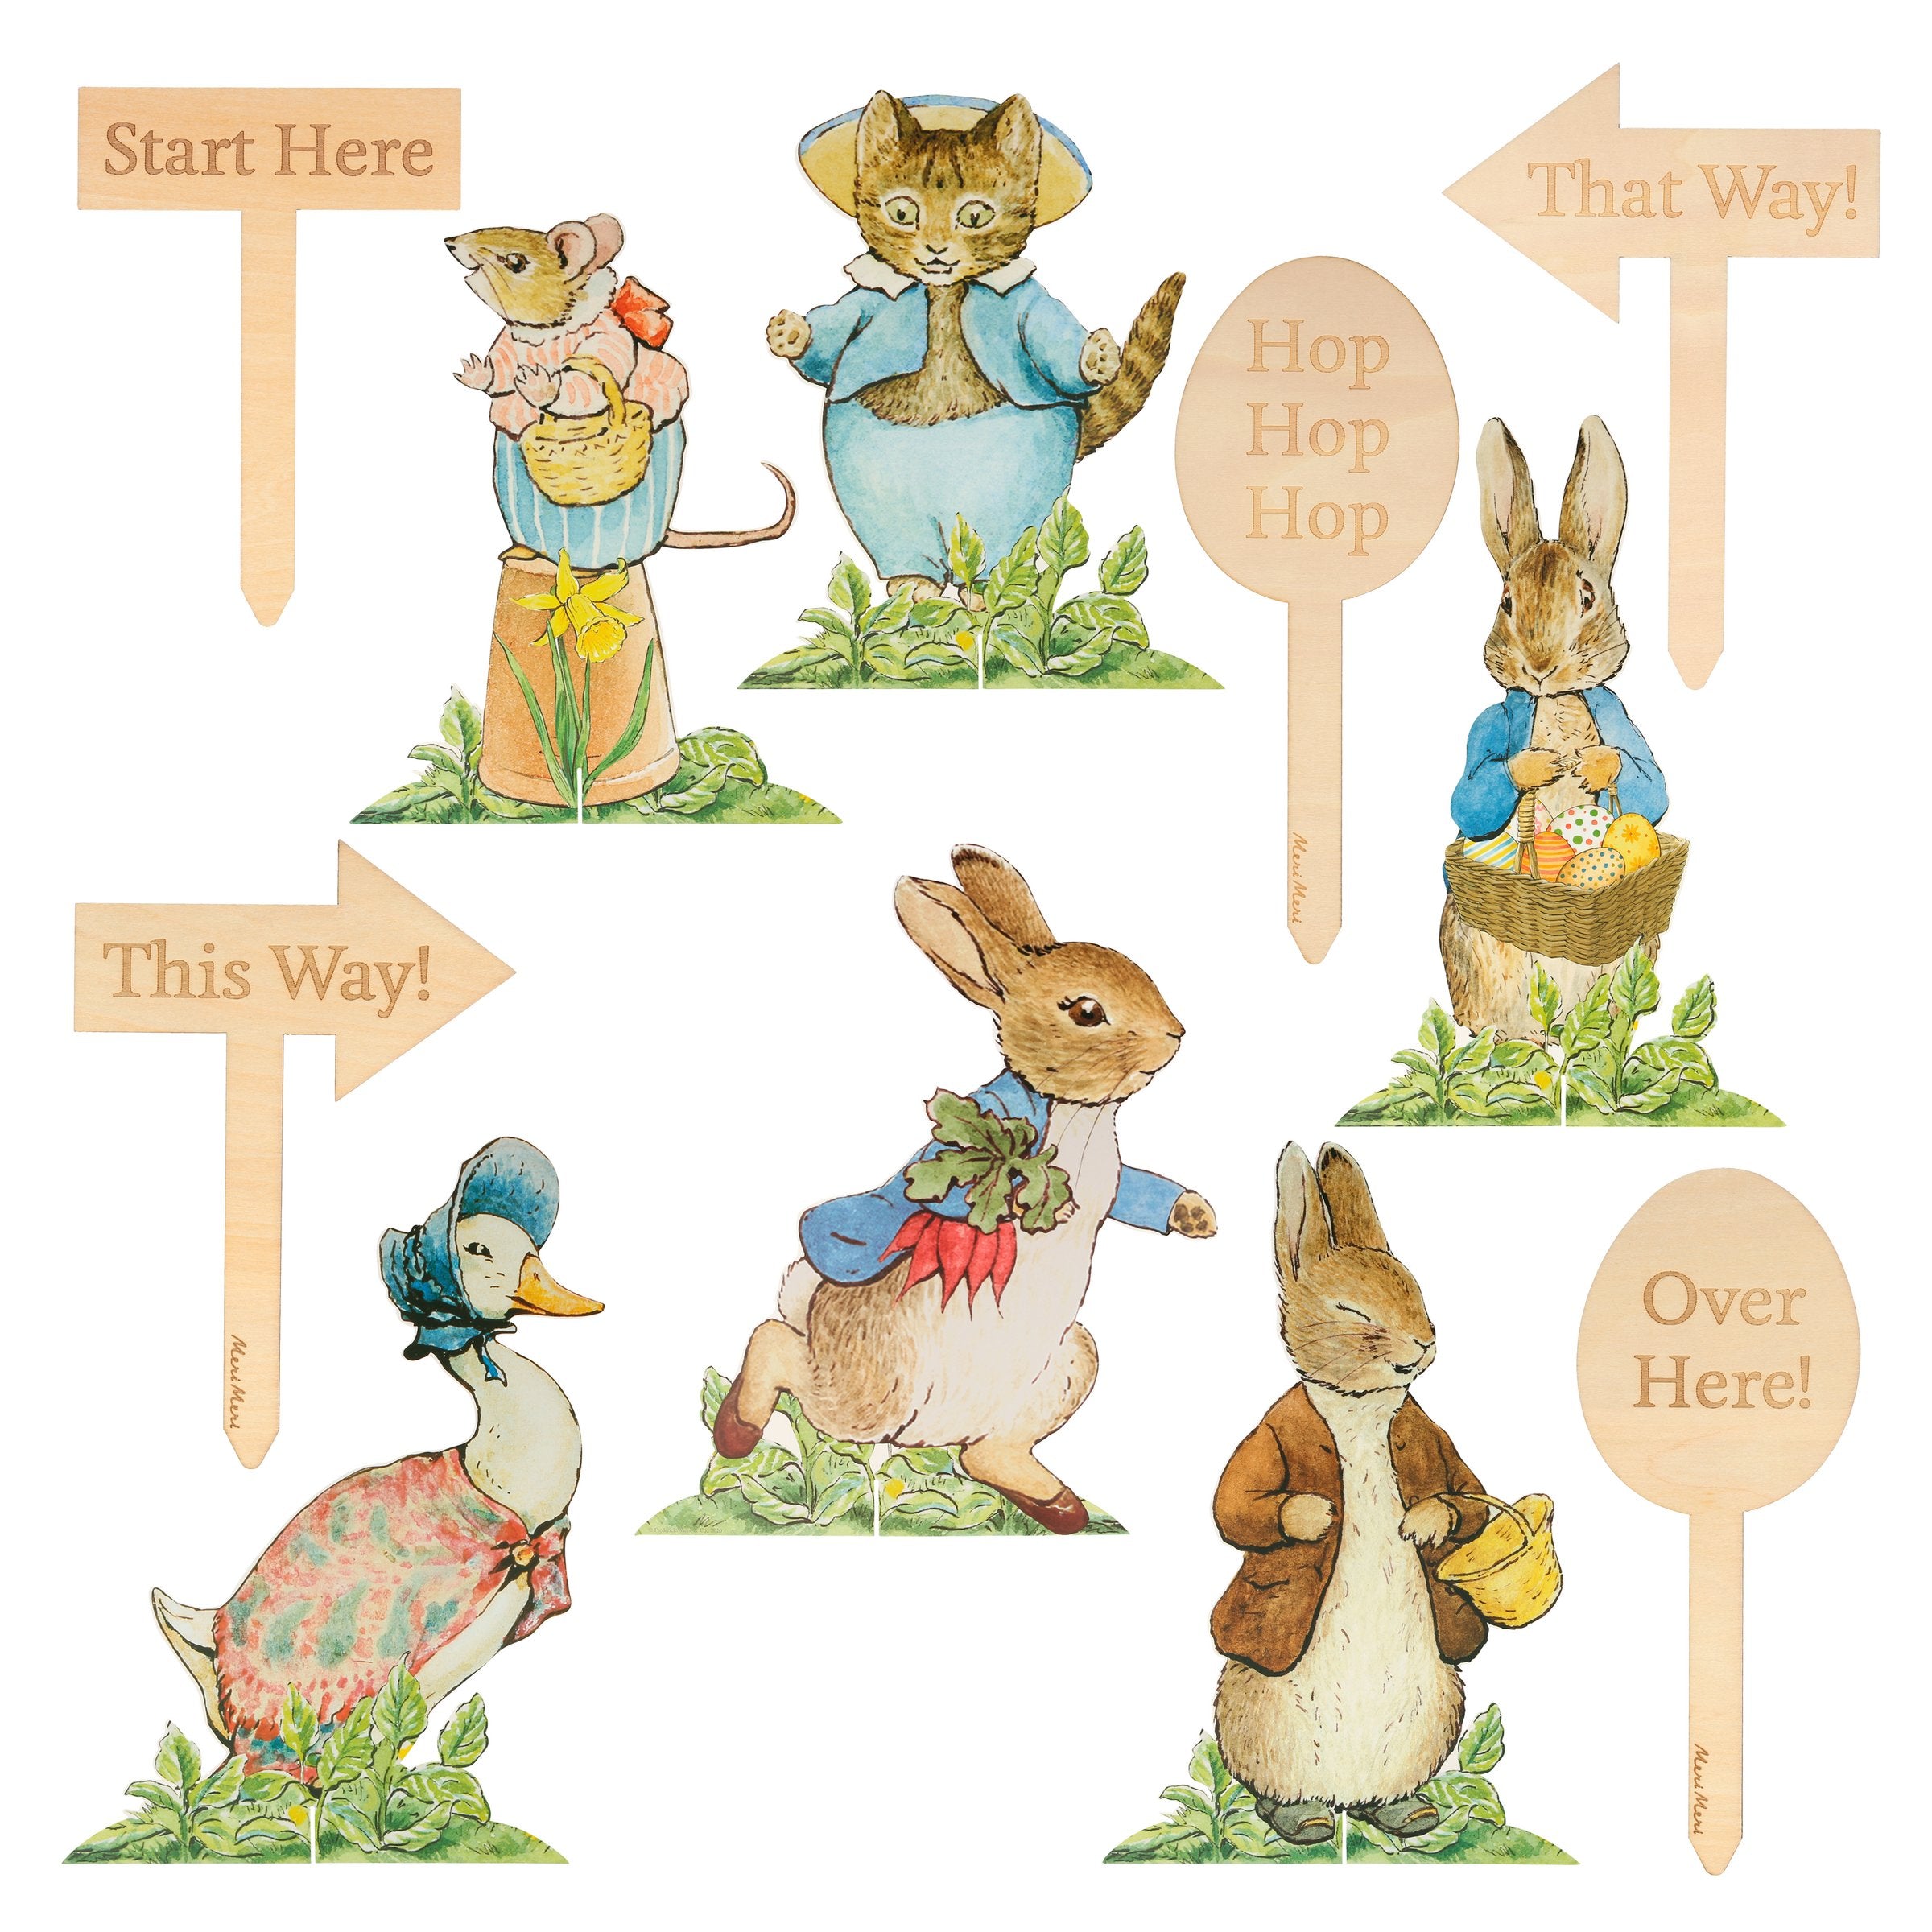 This Easter egg hunt set includes 6 charming characters and 6 etched wooden stakes